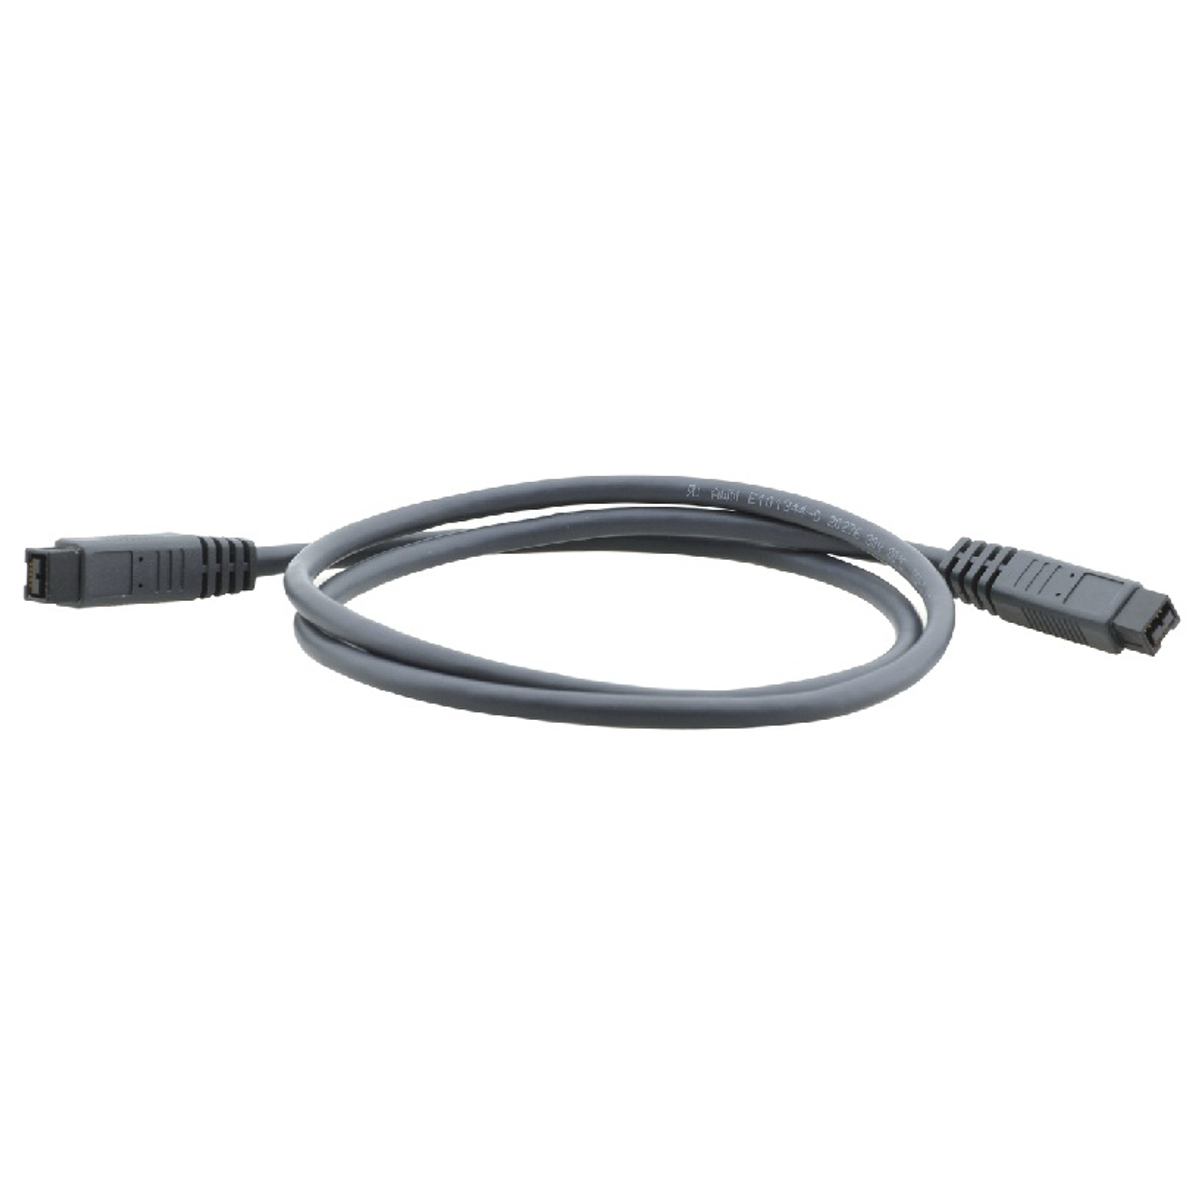 9-Pin (M) to 9-Pin (M) FireWire Cable